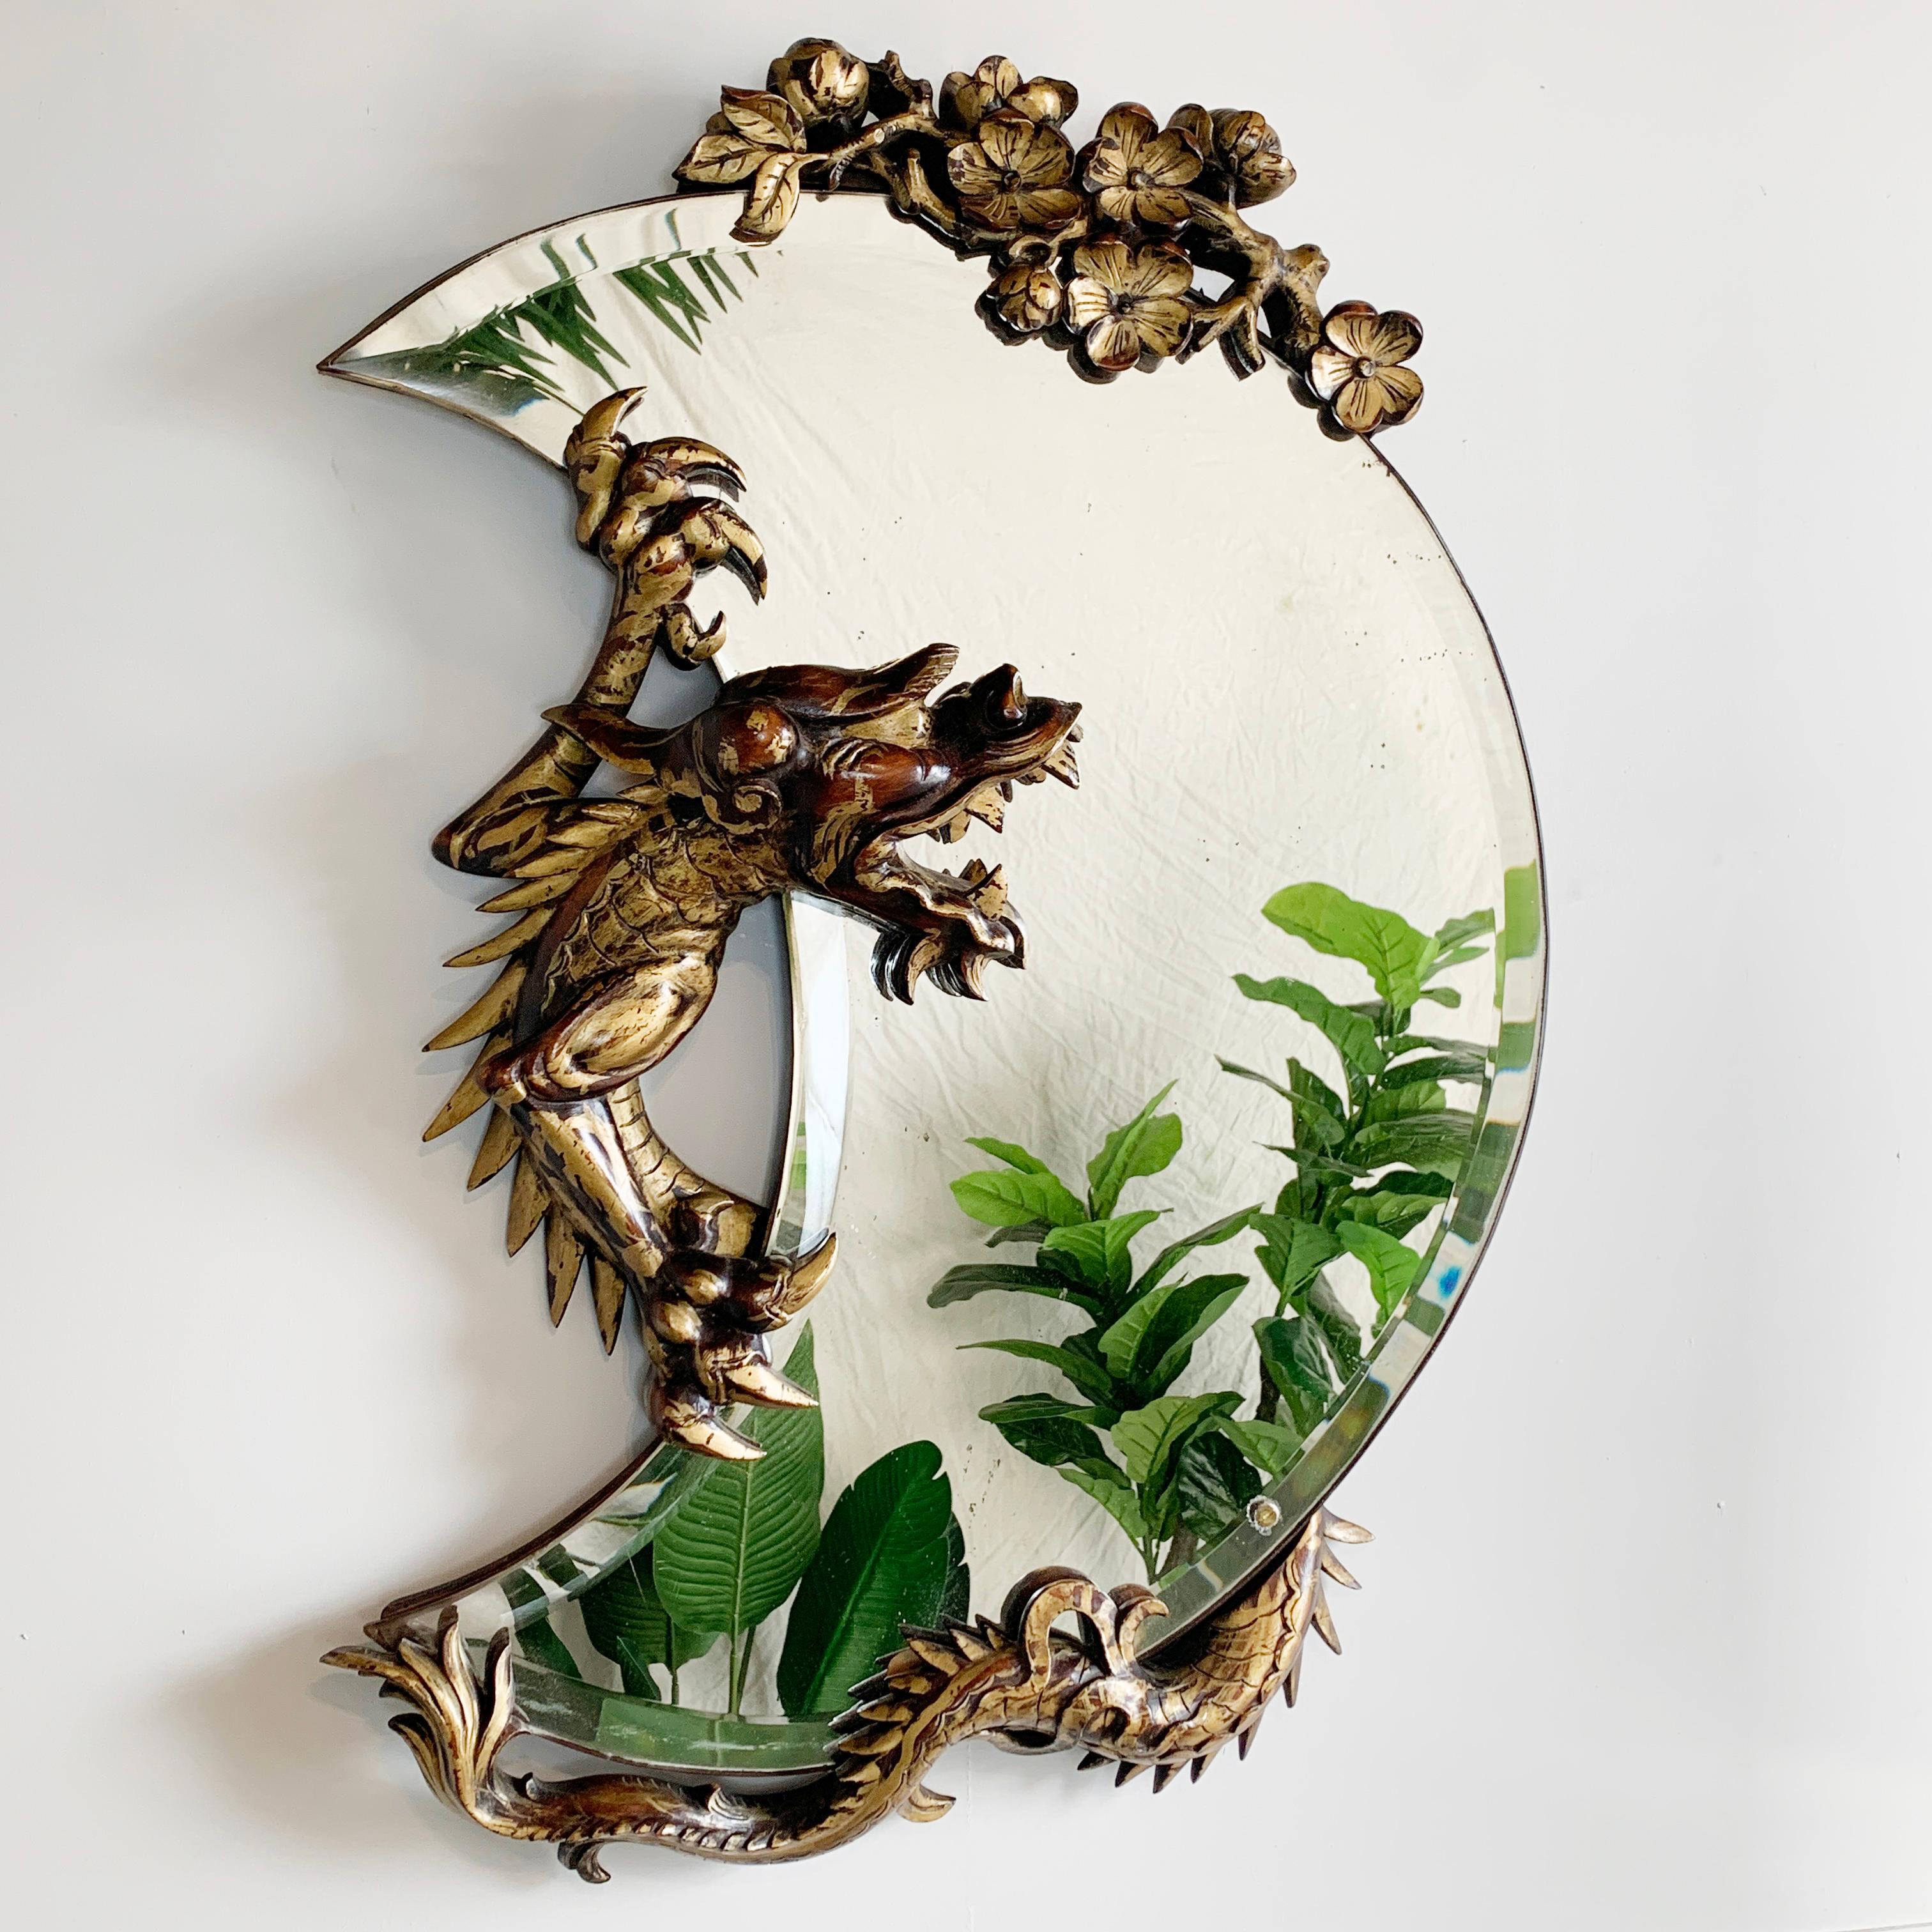 An incredible 19th century crescent mirror attributed to Gabriel Viardot, with deeply carved wooden gilt decorated Dragon gripping the plate in it’s claws, a spray of cherry blossom chinoisierie flowers at the base. This is an absolutely stunning